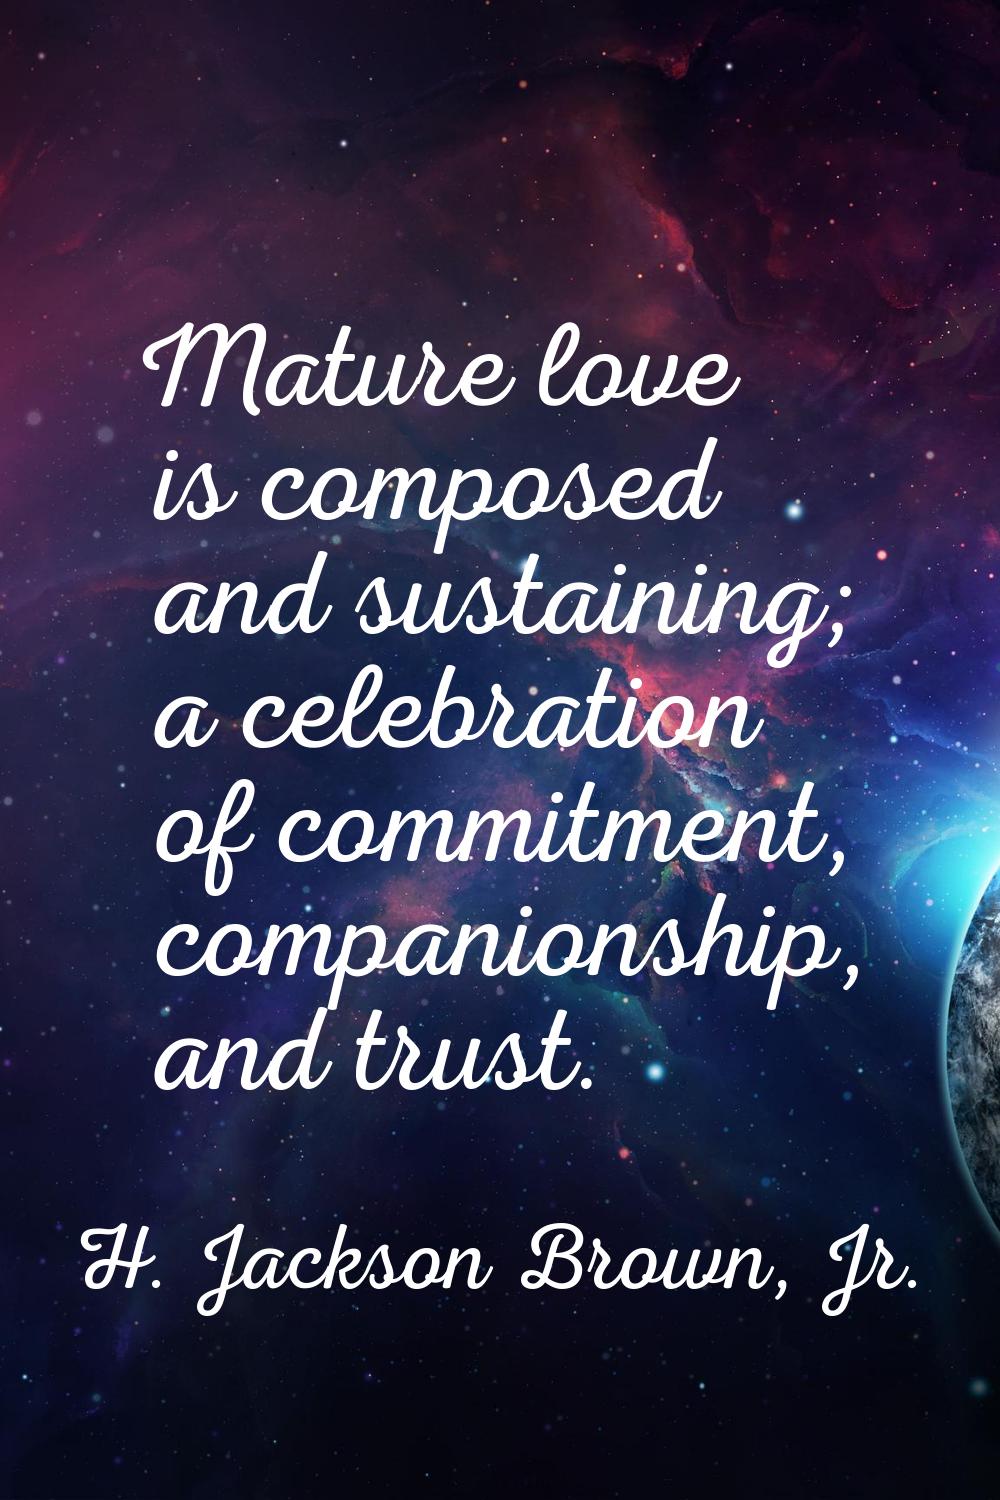 Mature love is composed and sustaining; a celebration of commitment, companionship, and trust.